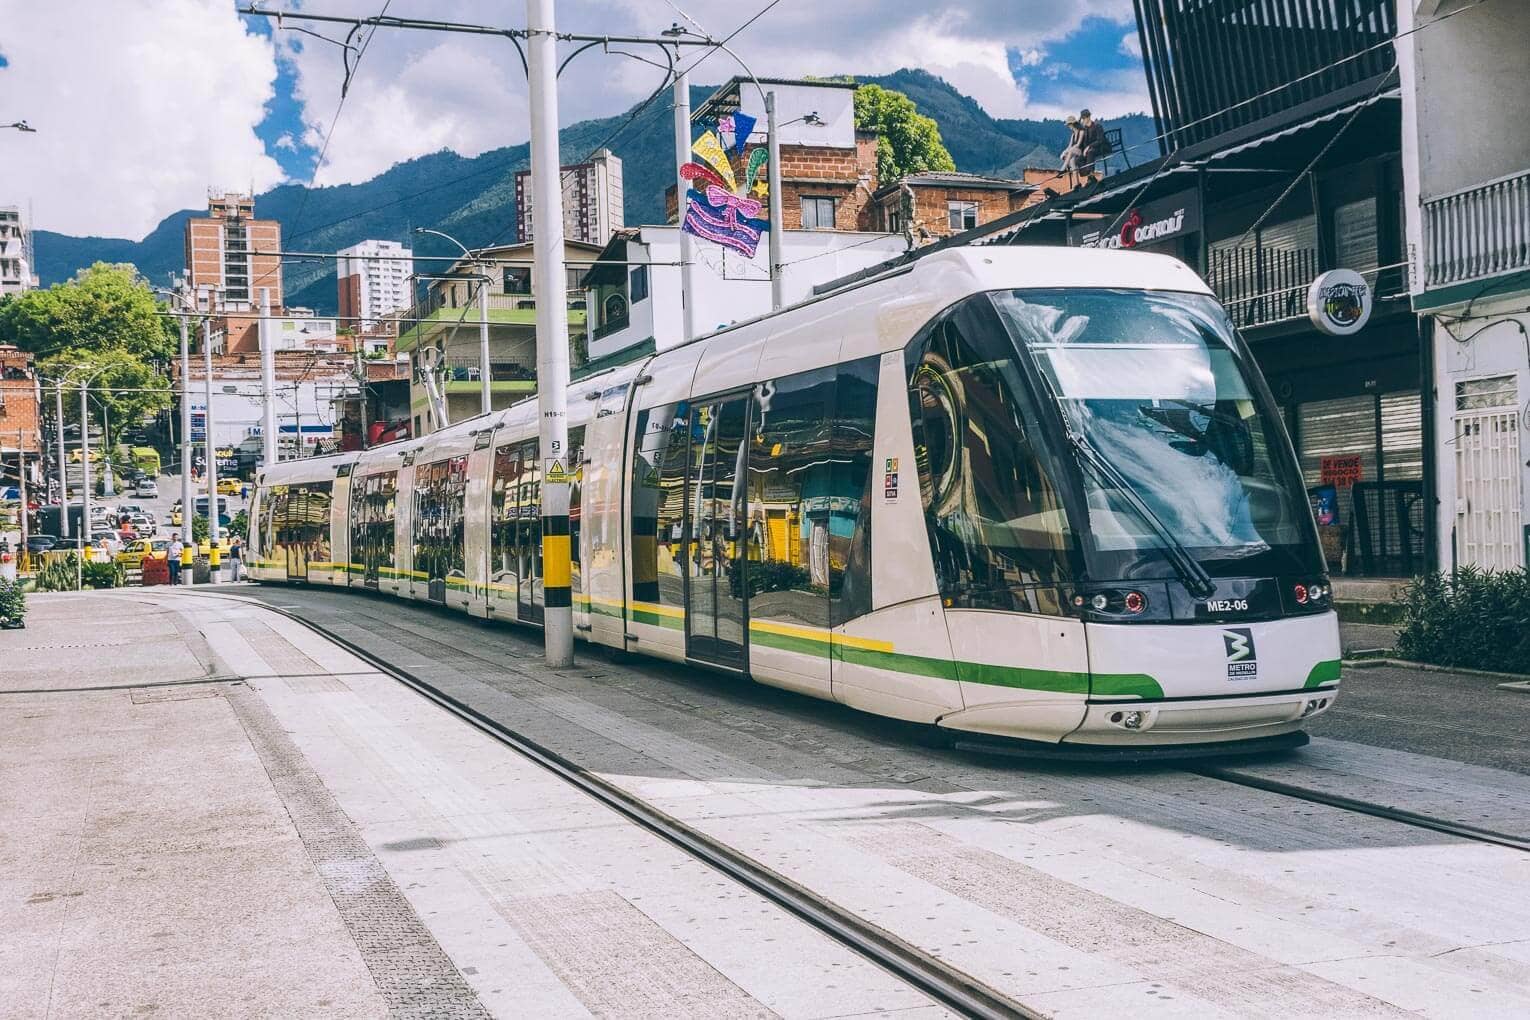 How to get around Medellin and how to get to/from the airport